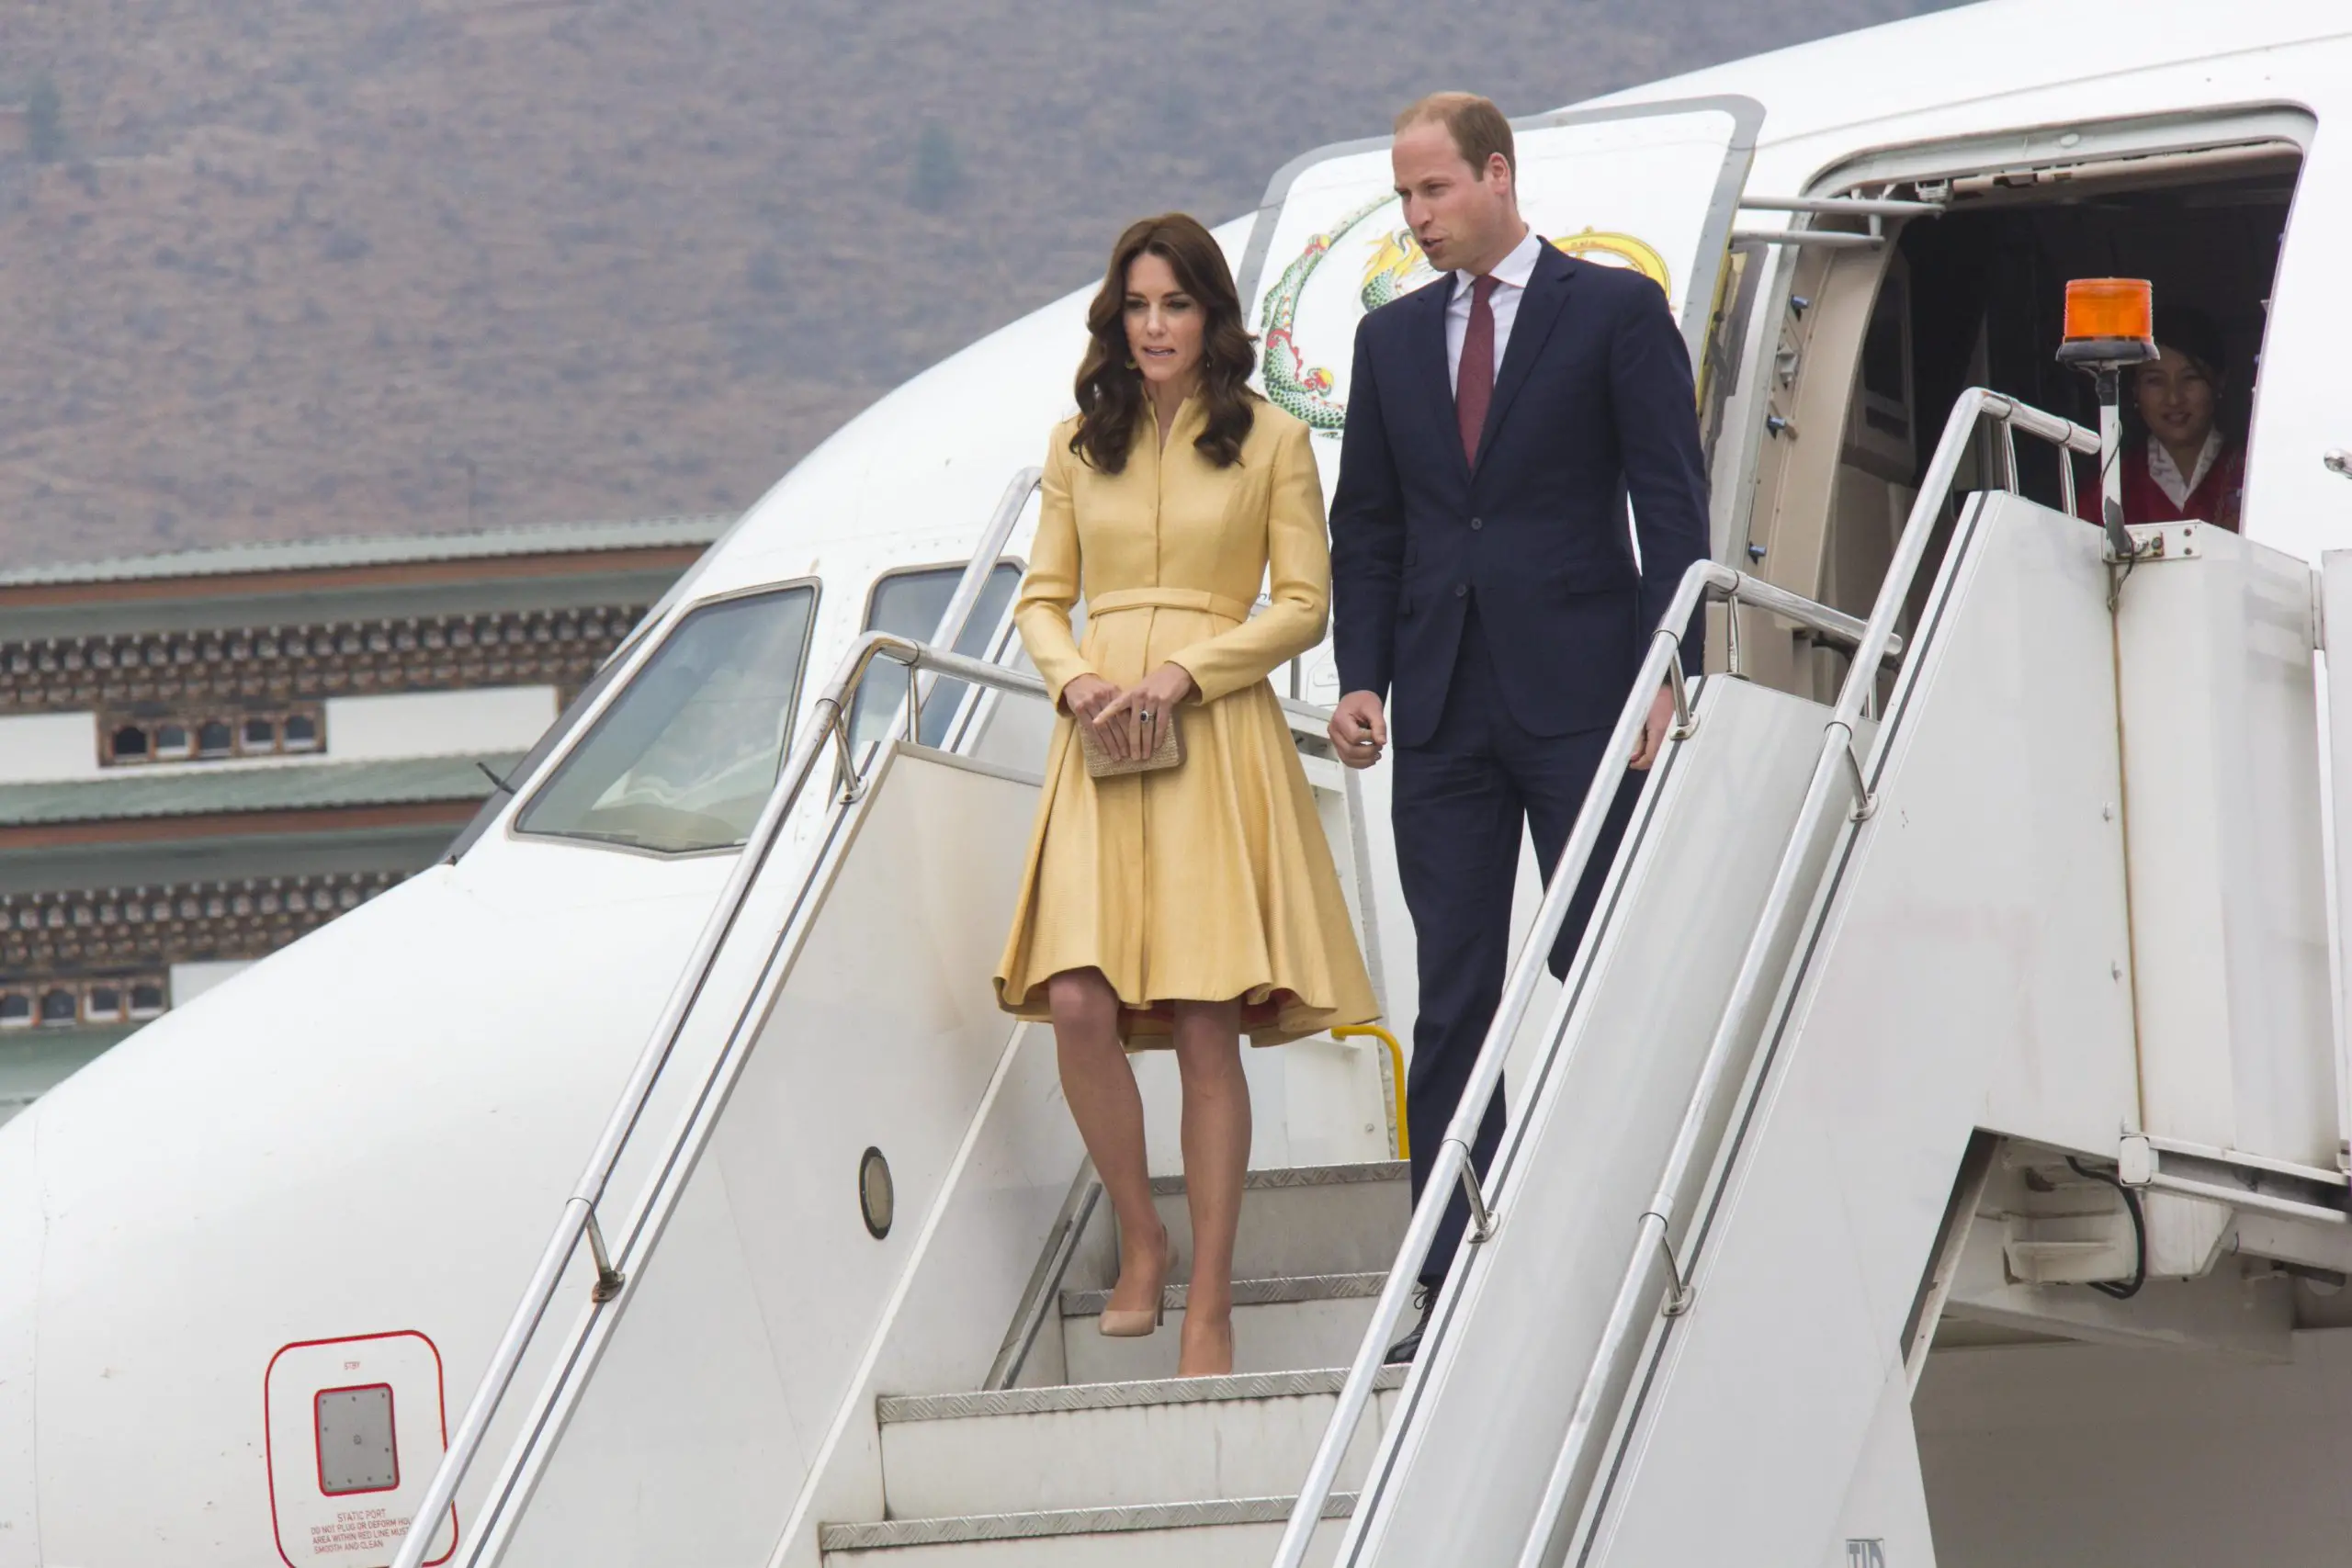 The Duke and Duchess of Cambridge arrived in Bhutan for Royal Tour